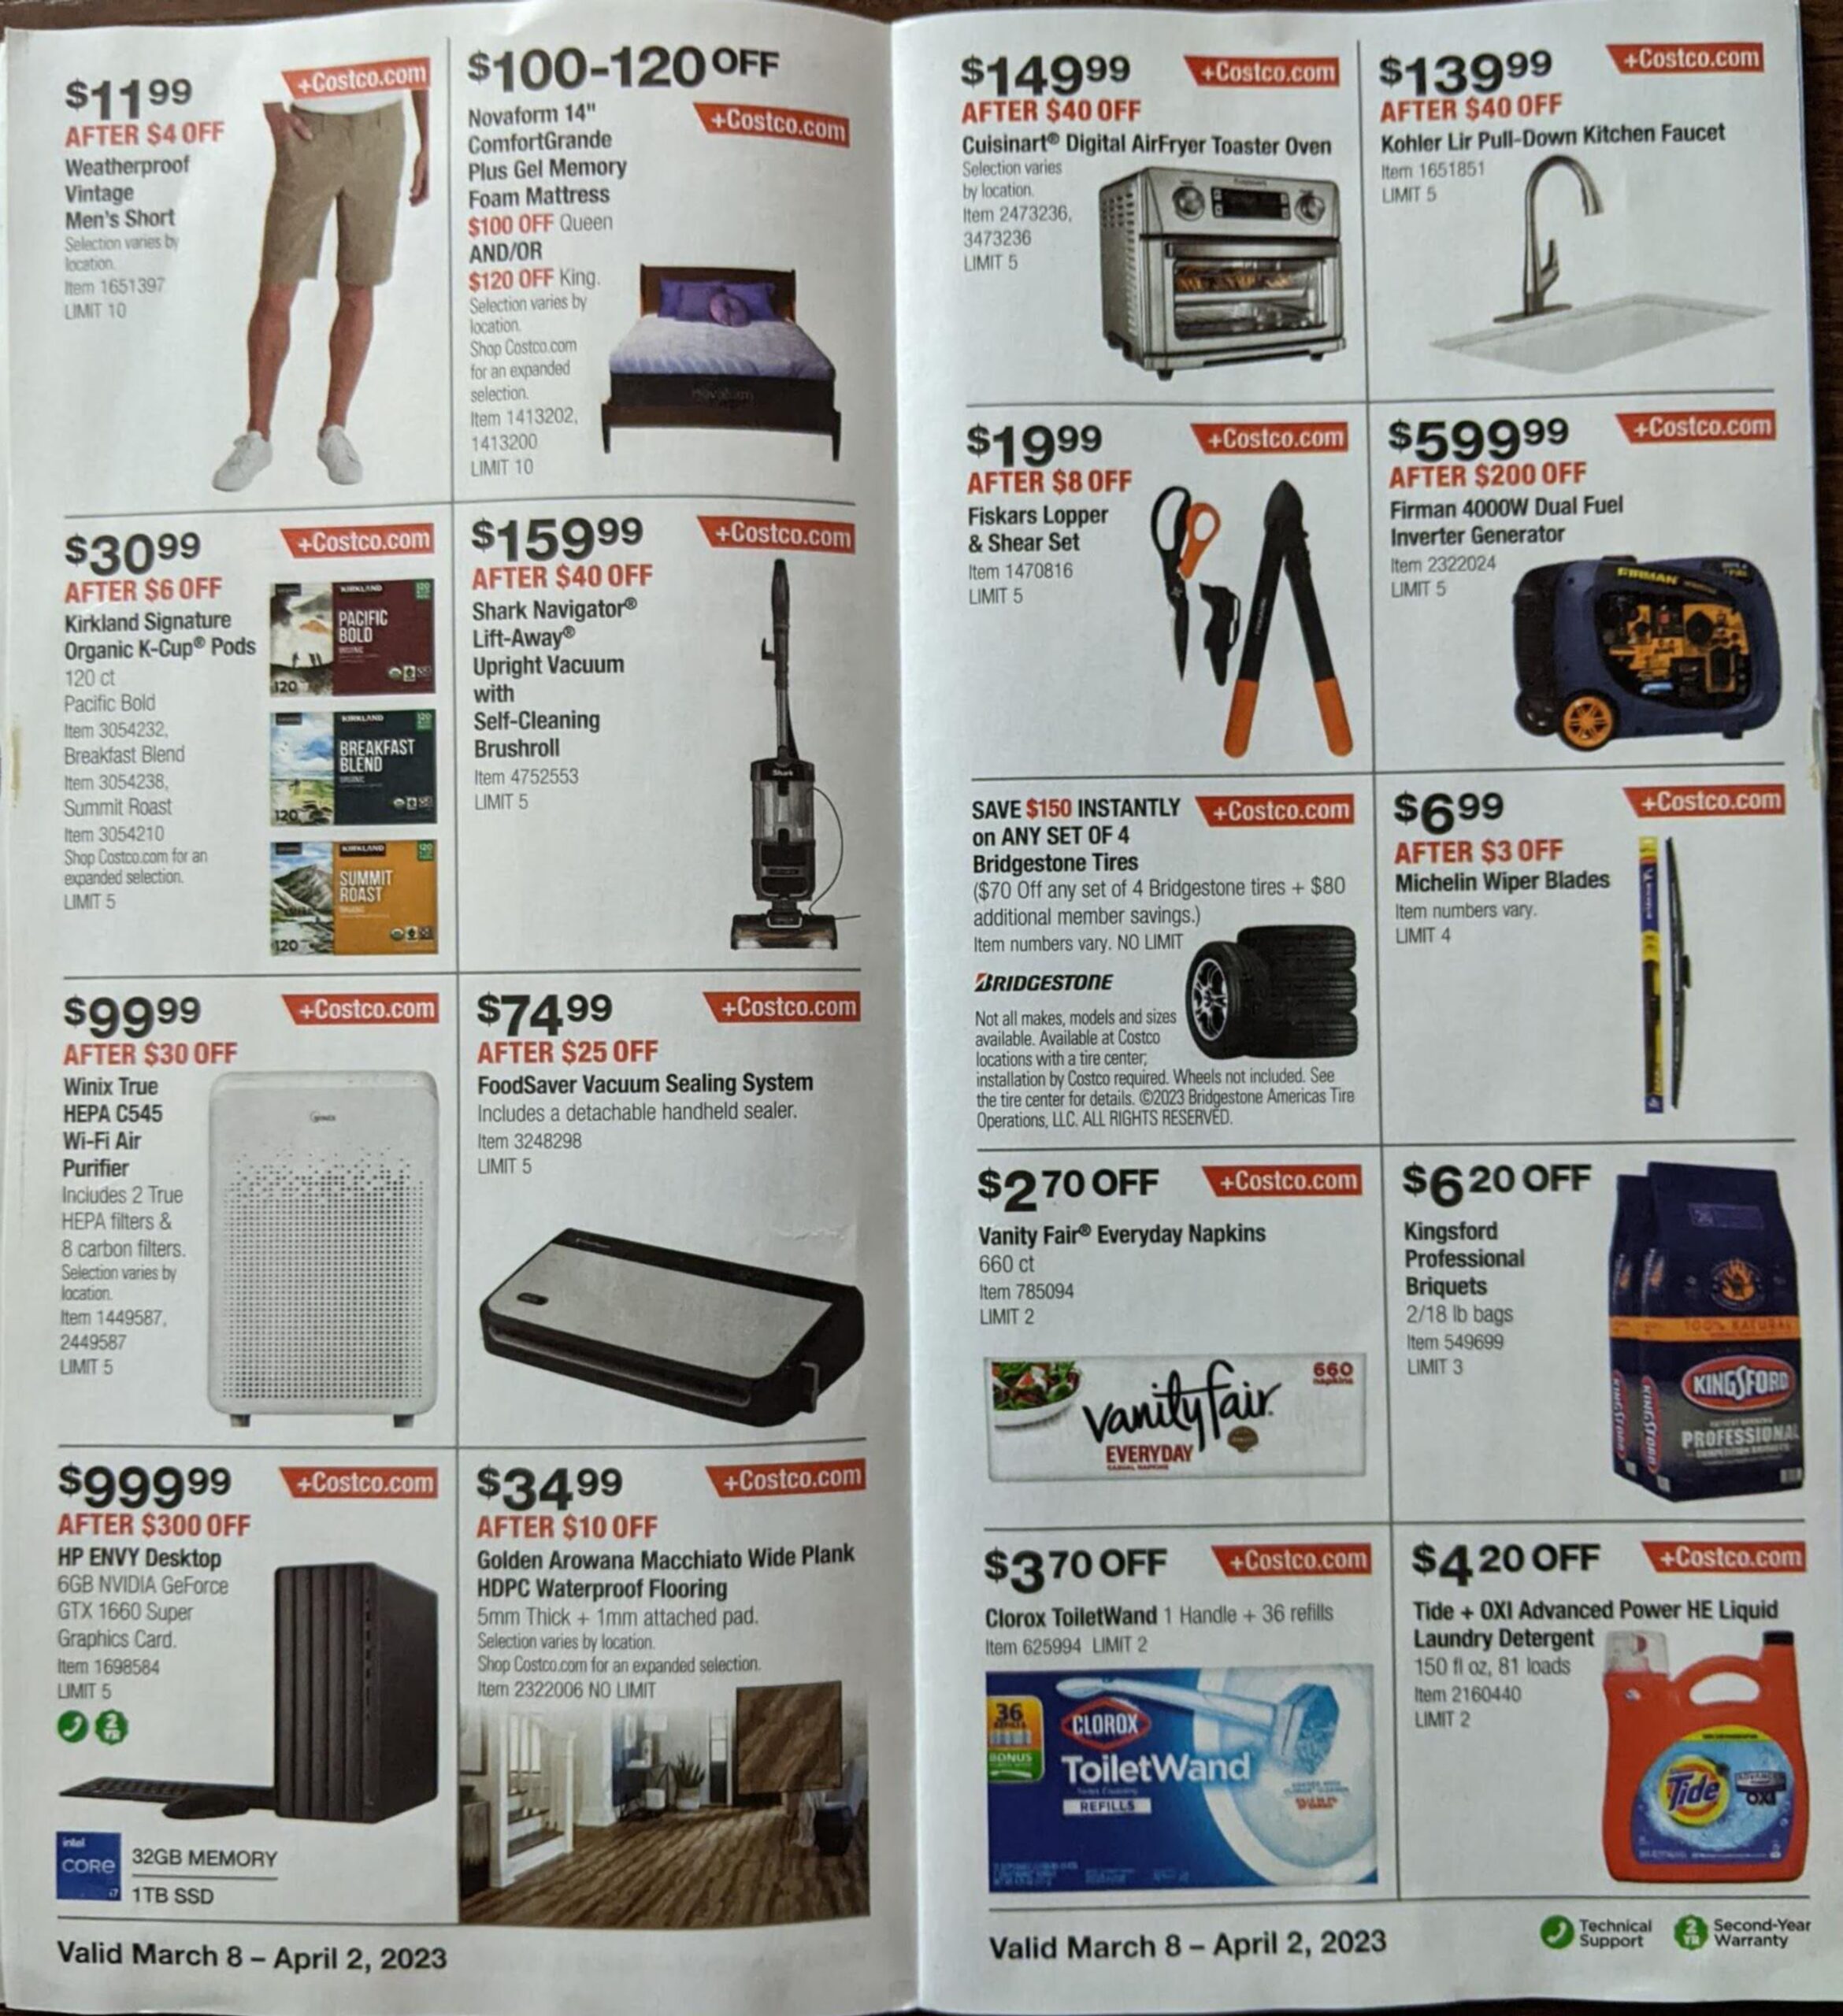 Costco Coupon Book March 2023